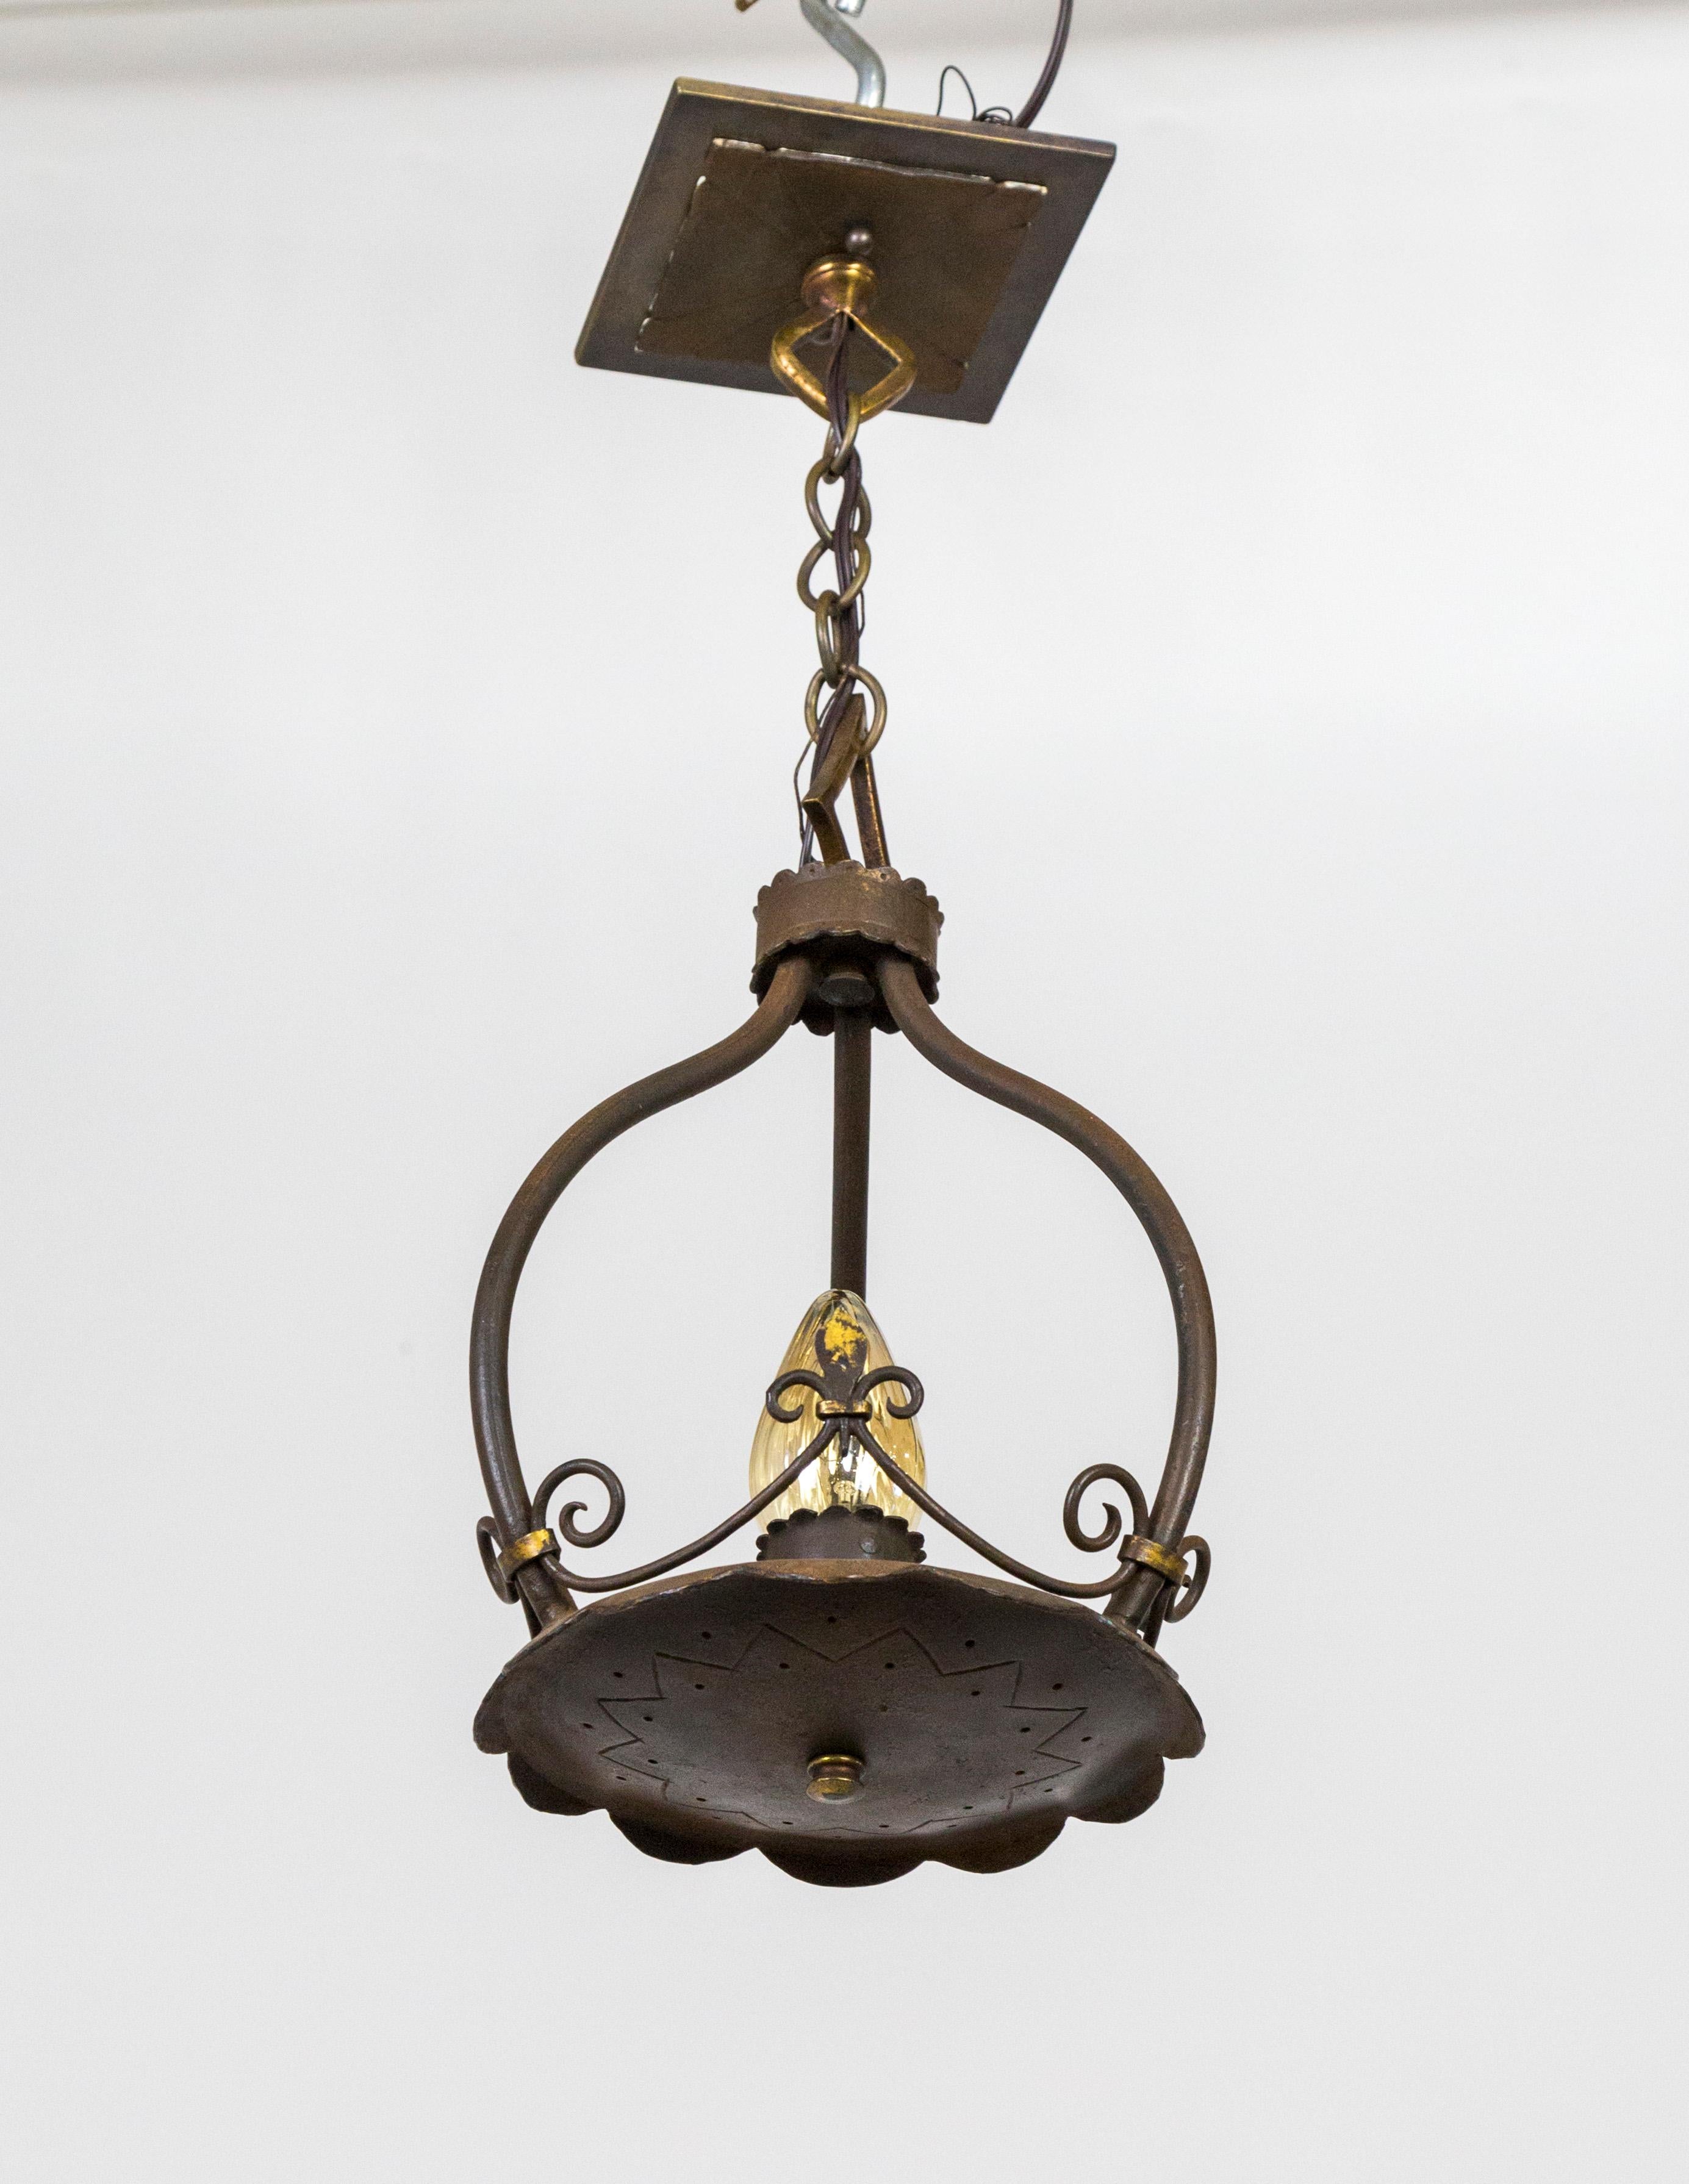 A small, wrought iron pendant; with one upward facing socket with three curved arms hung with chain to a square canopy. With decorative details, wire fluer de lis, scalloped plate base, and unusual hardware. 1920s. Newly rewired. 20.25